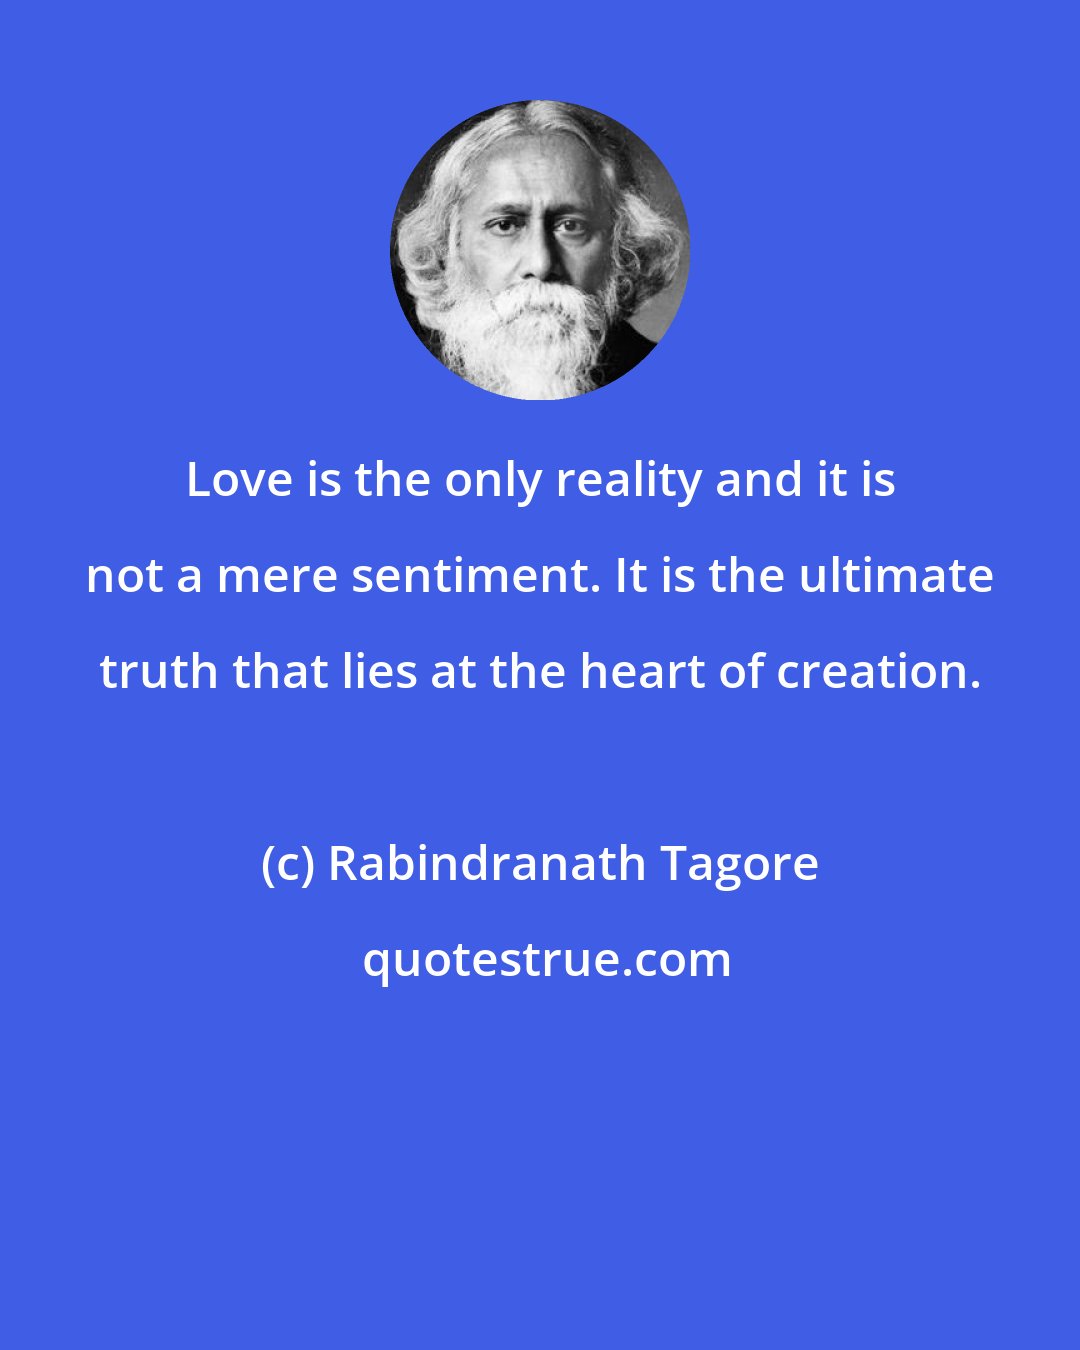 Rabindranath Tagore: Love is the only reality and it is not a mere sentiment. It is the ultimate truth that lies at the heart of creation.